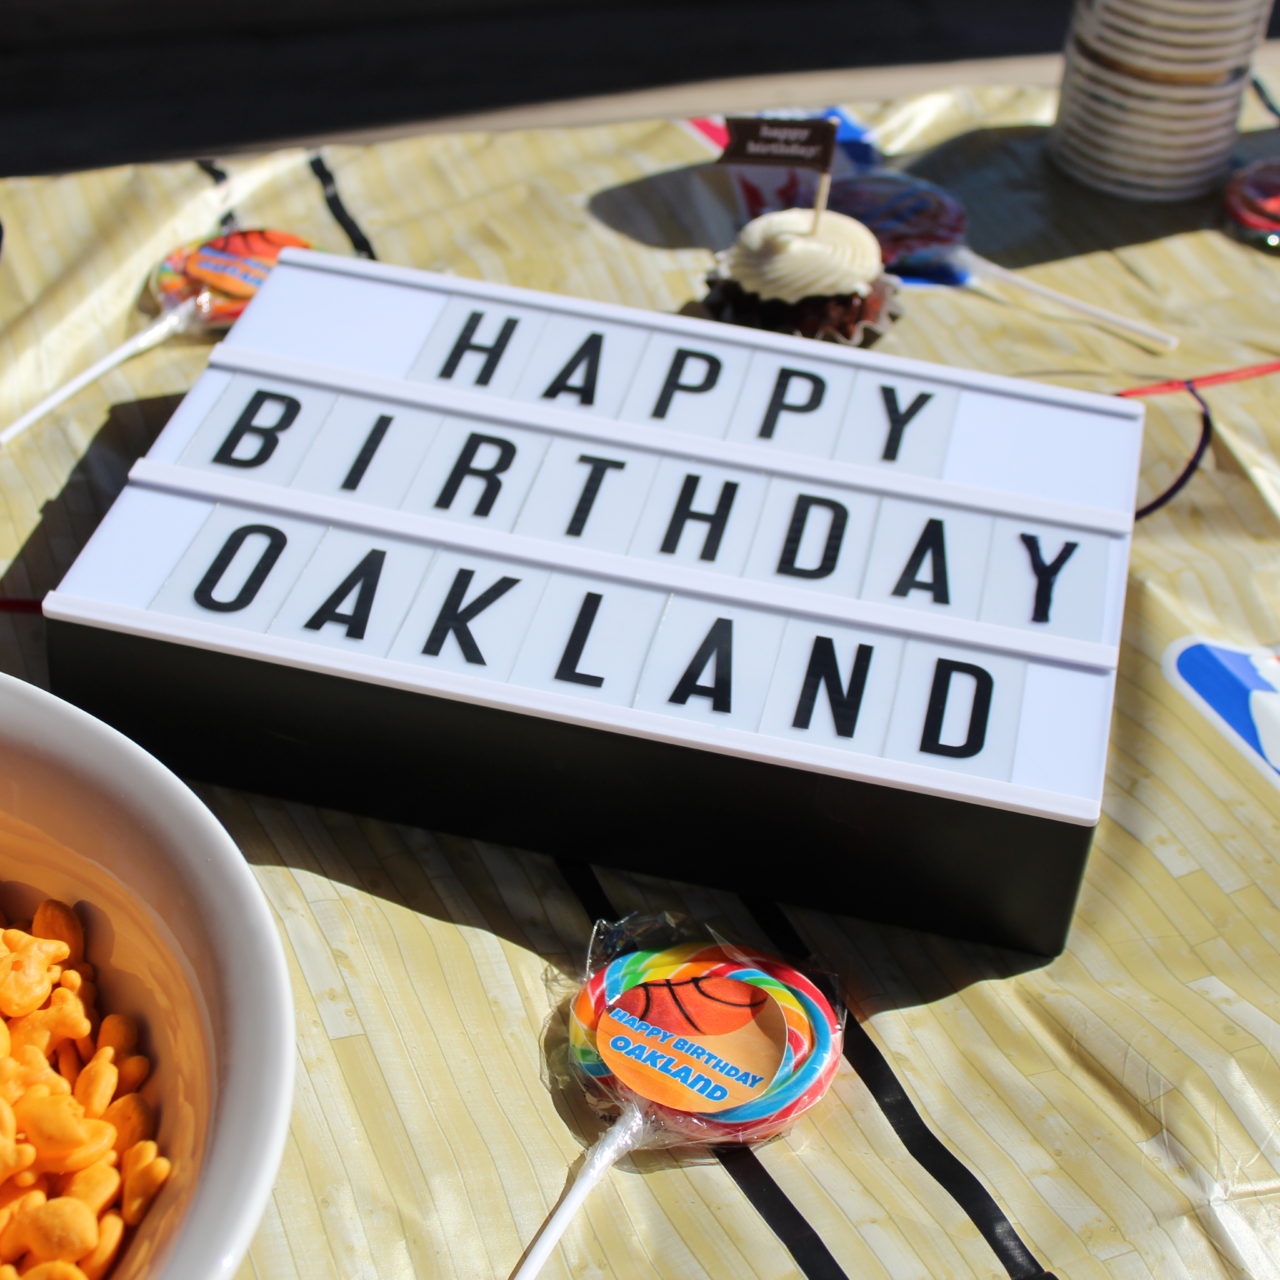 Oakland’s Basketball Party!